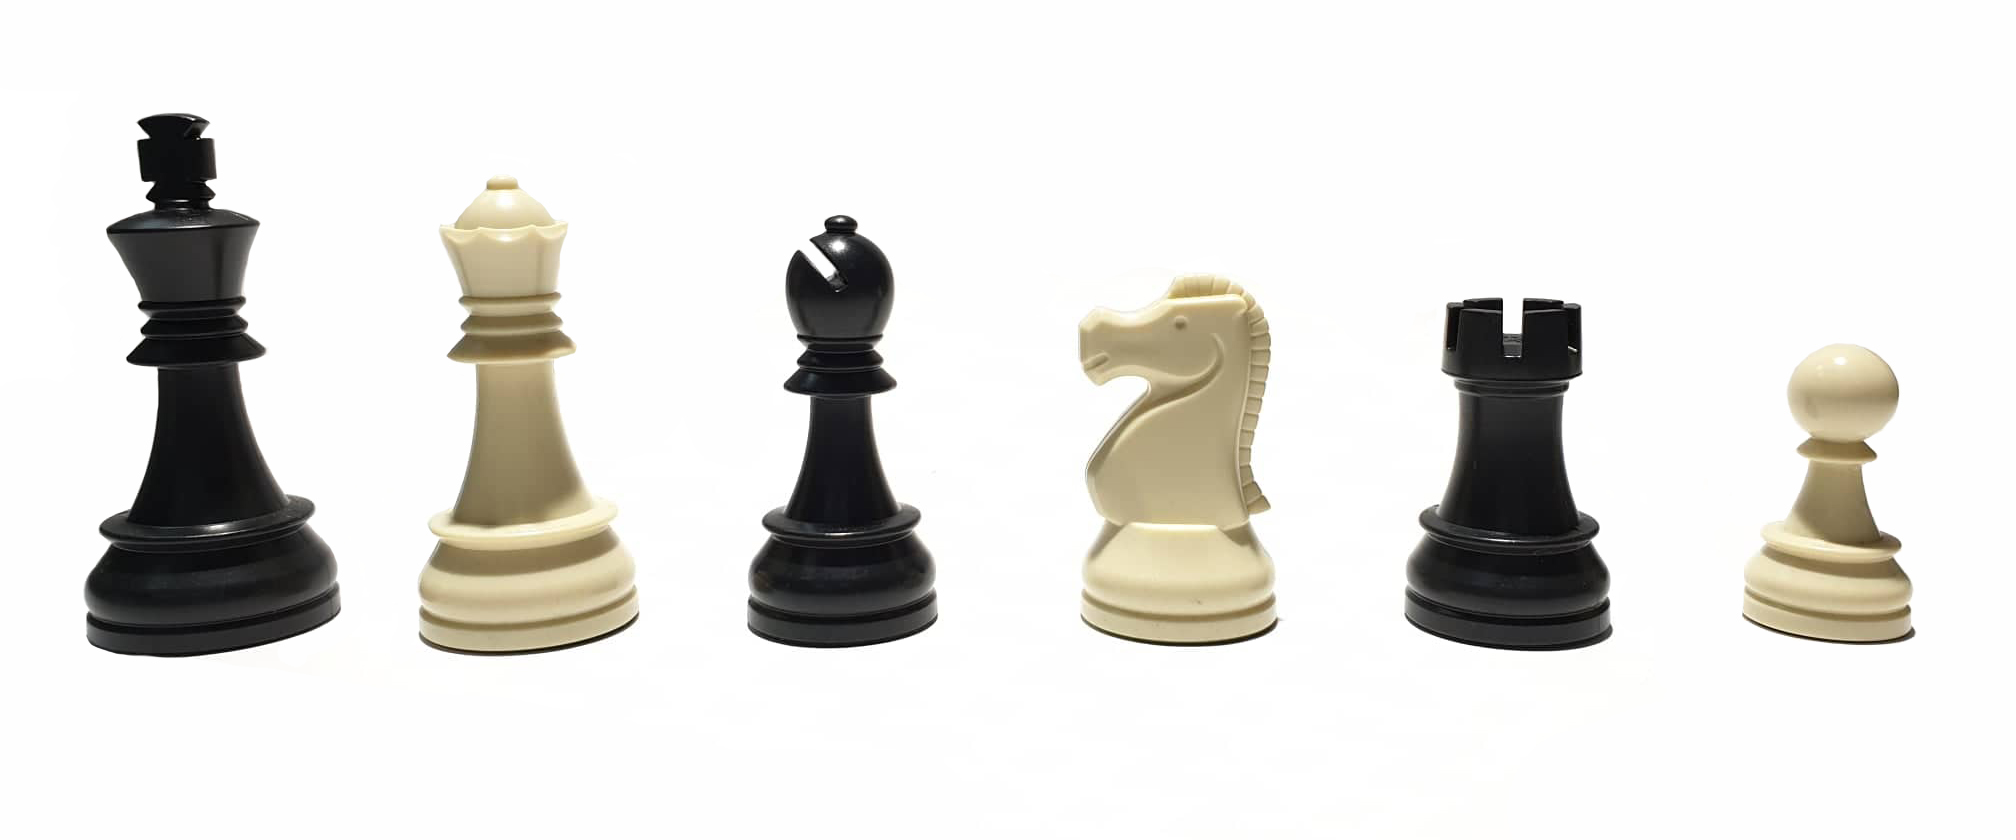 Buy 10195 Dgt Chess Pieces Plastic 86mm In Bag Online At Best Price